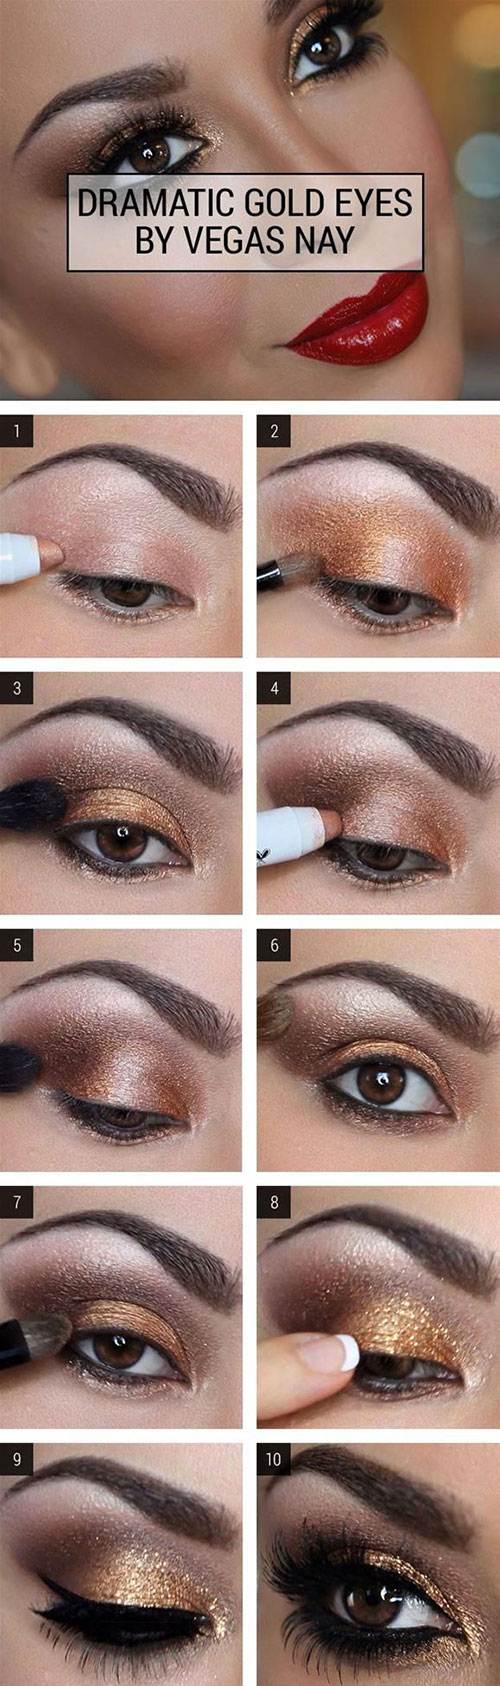 Best Smokey Eye Makeup For Brown Eyes How To Do Smokey Eye Makeup Top 10 Tutorial Pictures For 2019